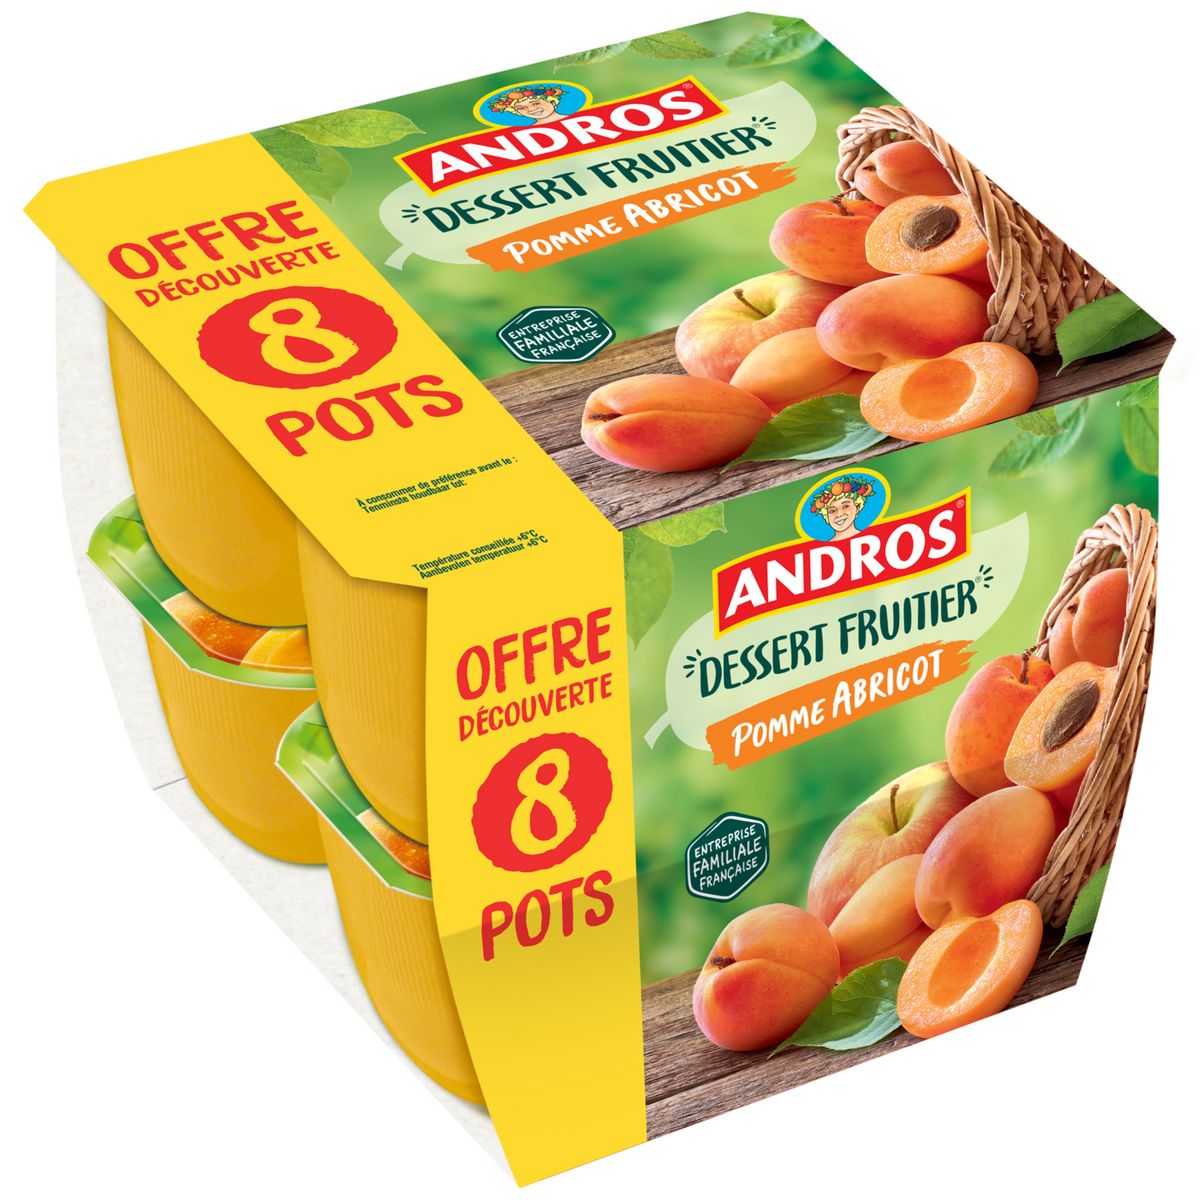 ANDROS Dessert fruitier pomme abricot 8x100g